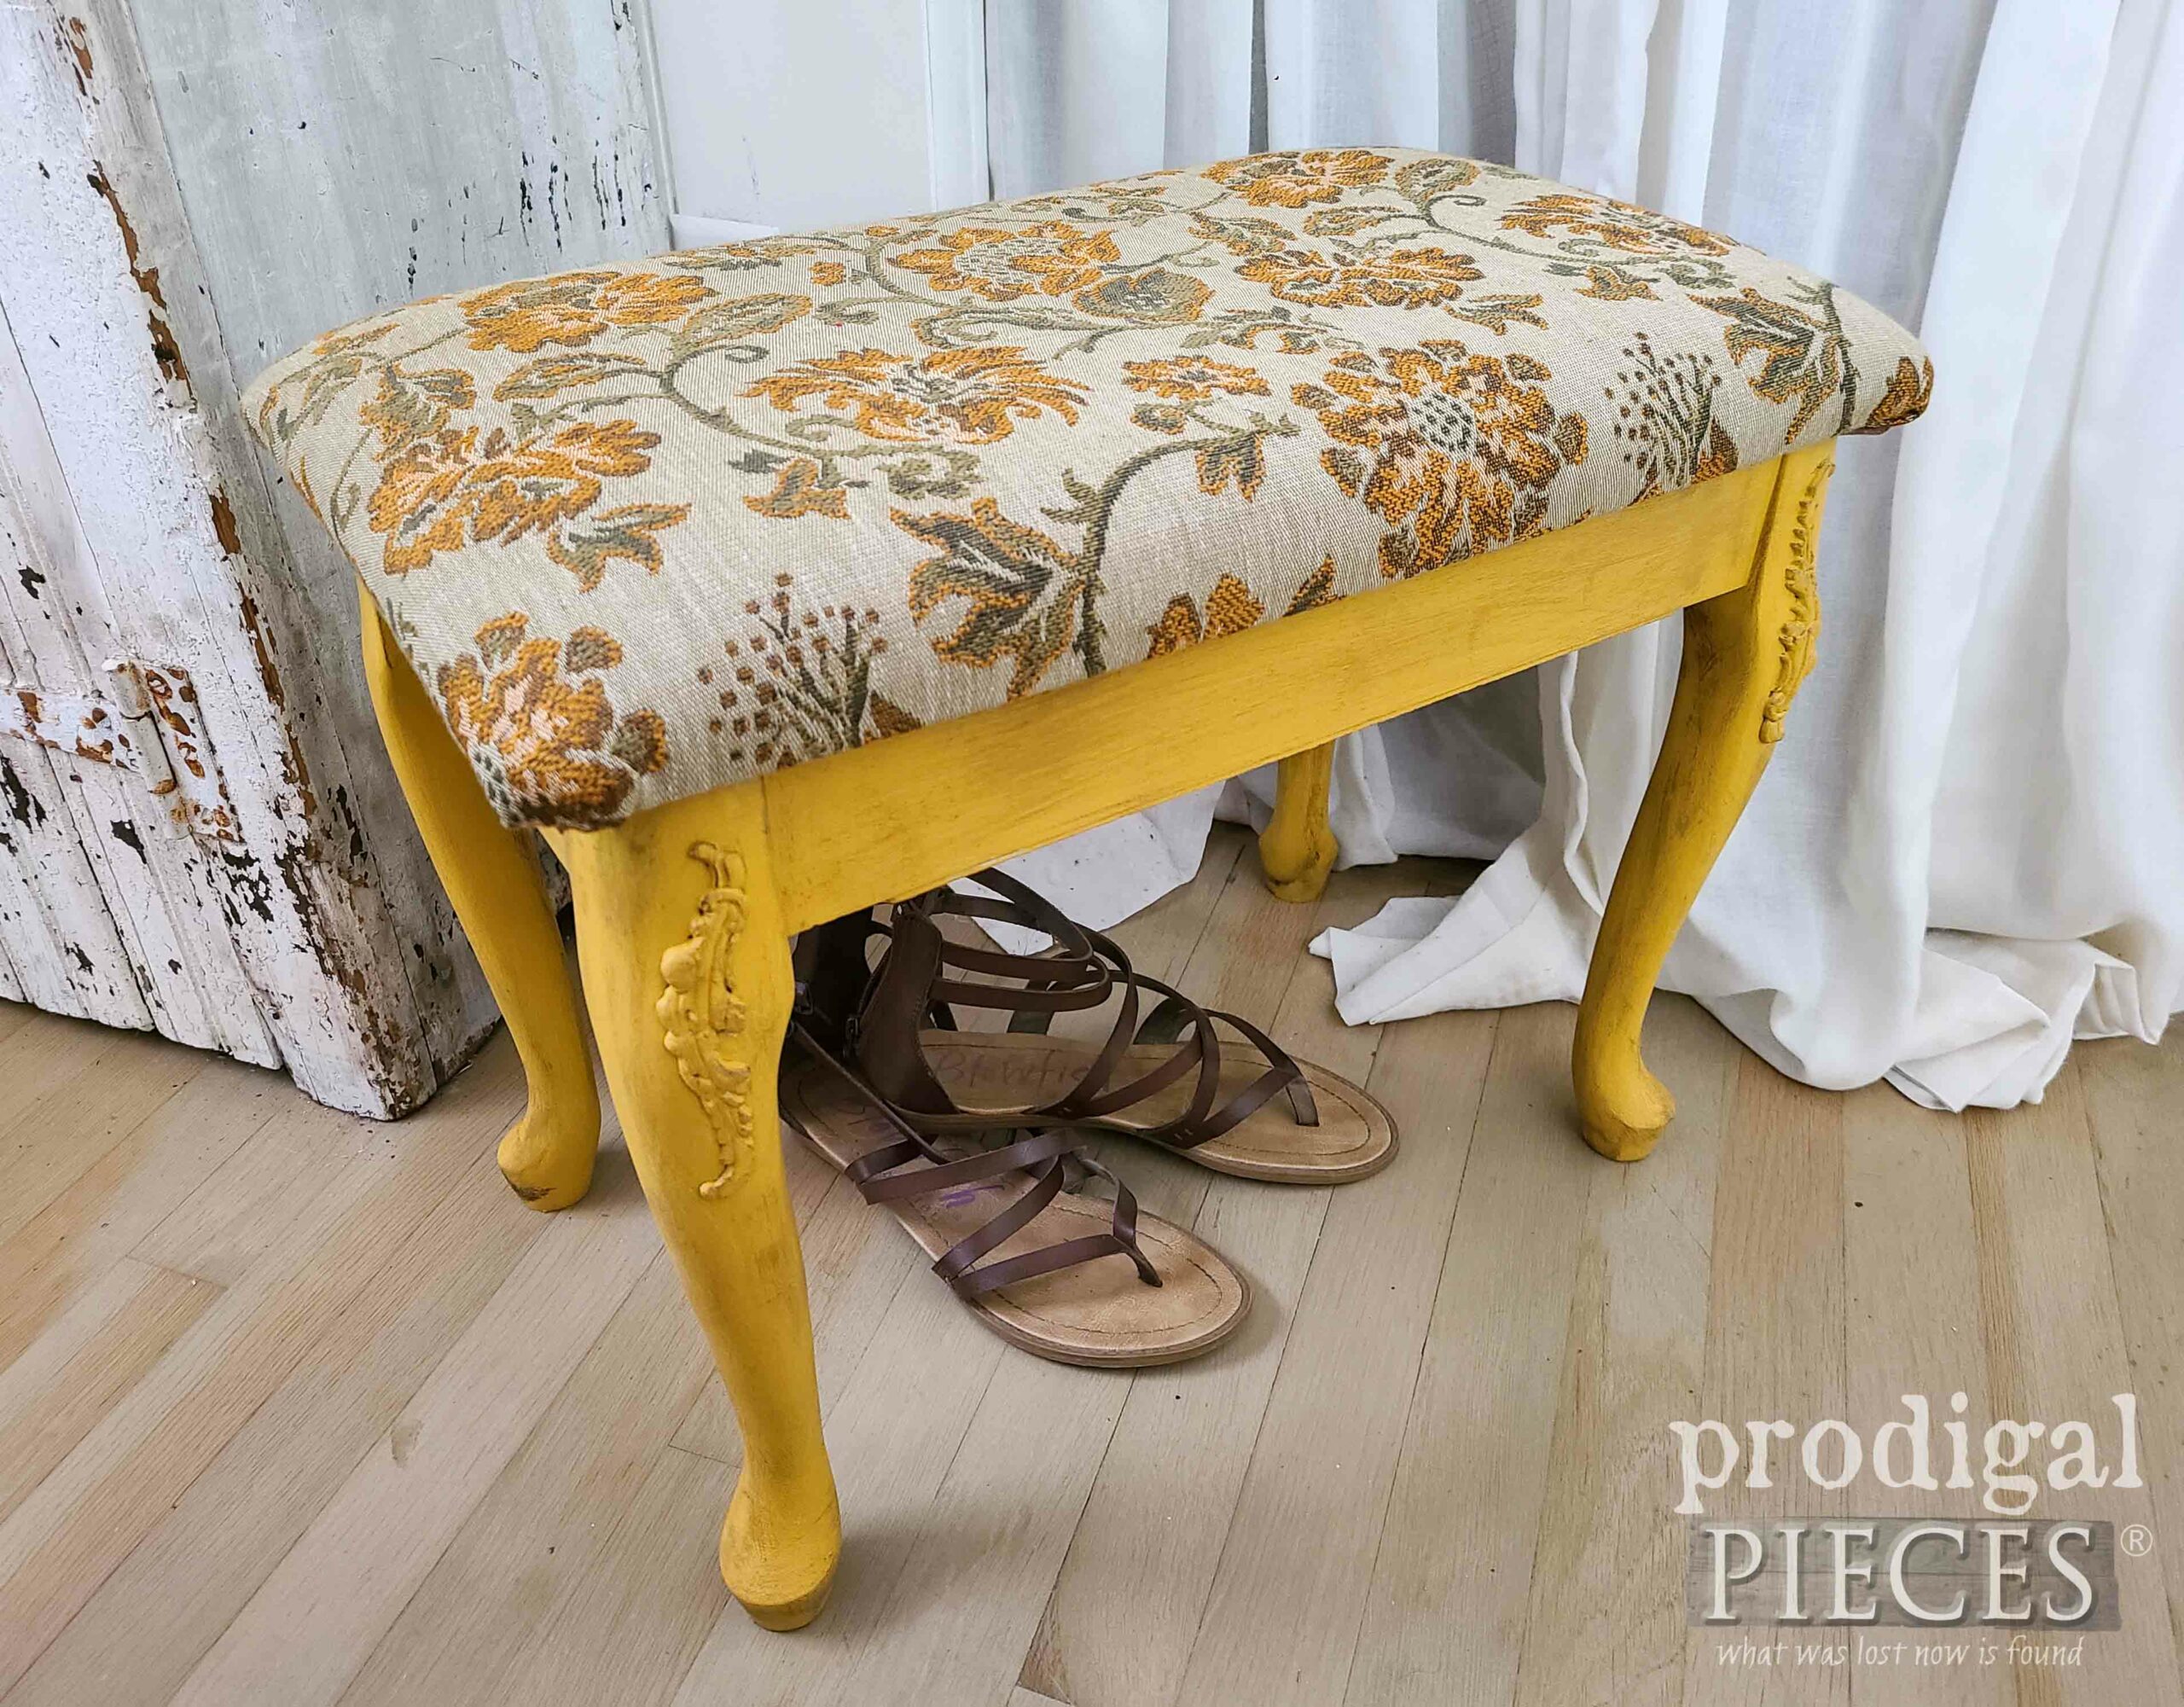 Side View of Queen Anne Upholstered Bench | shop.prodigalpieces.com #prodigalpieces